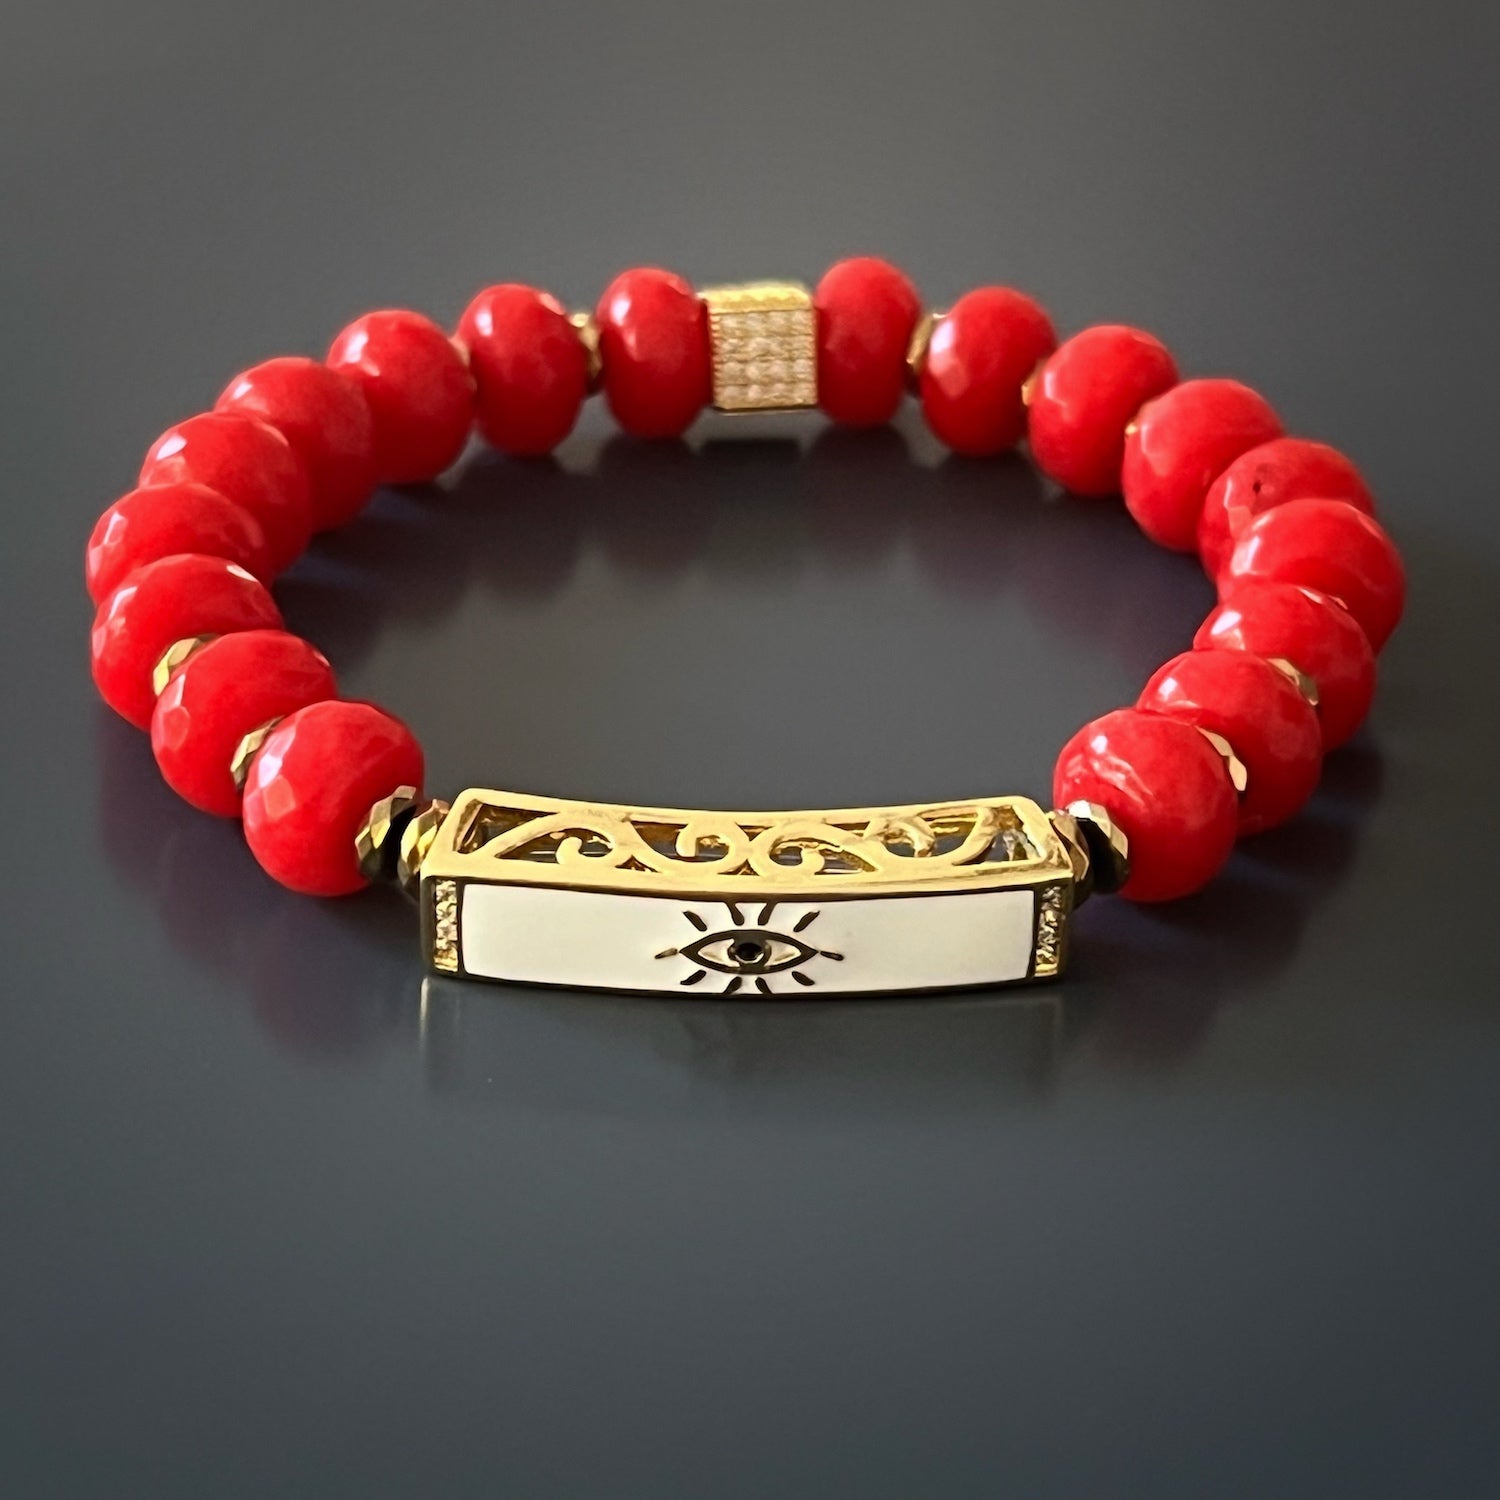 Feel the energetic power of the Red Energy Evil Eye Bracelet, handcrafted with care and attention to detail for a unique and meaningful accessory.